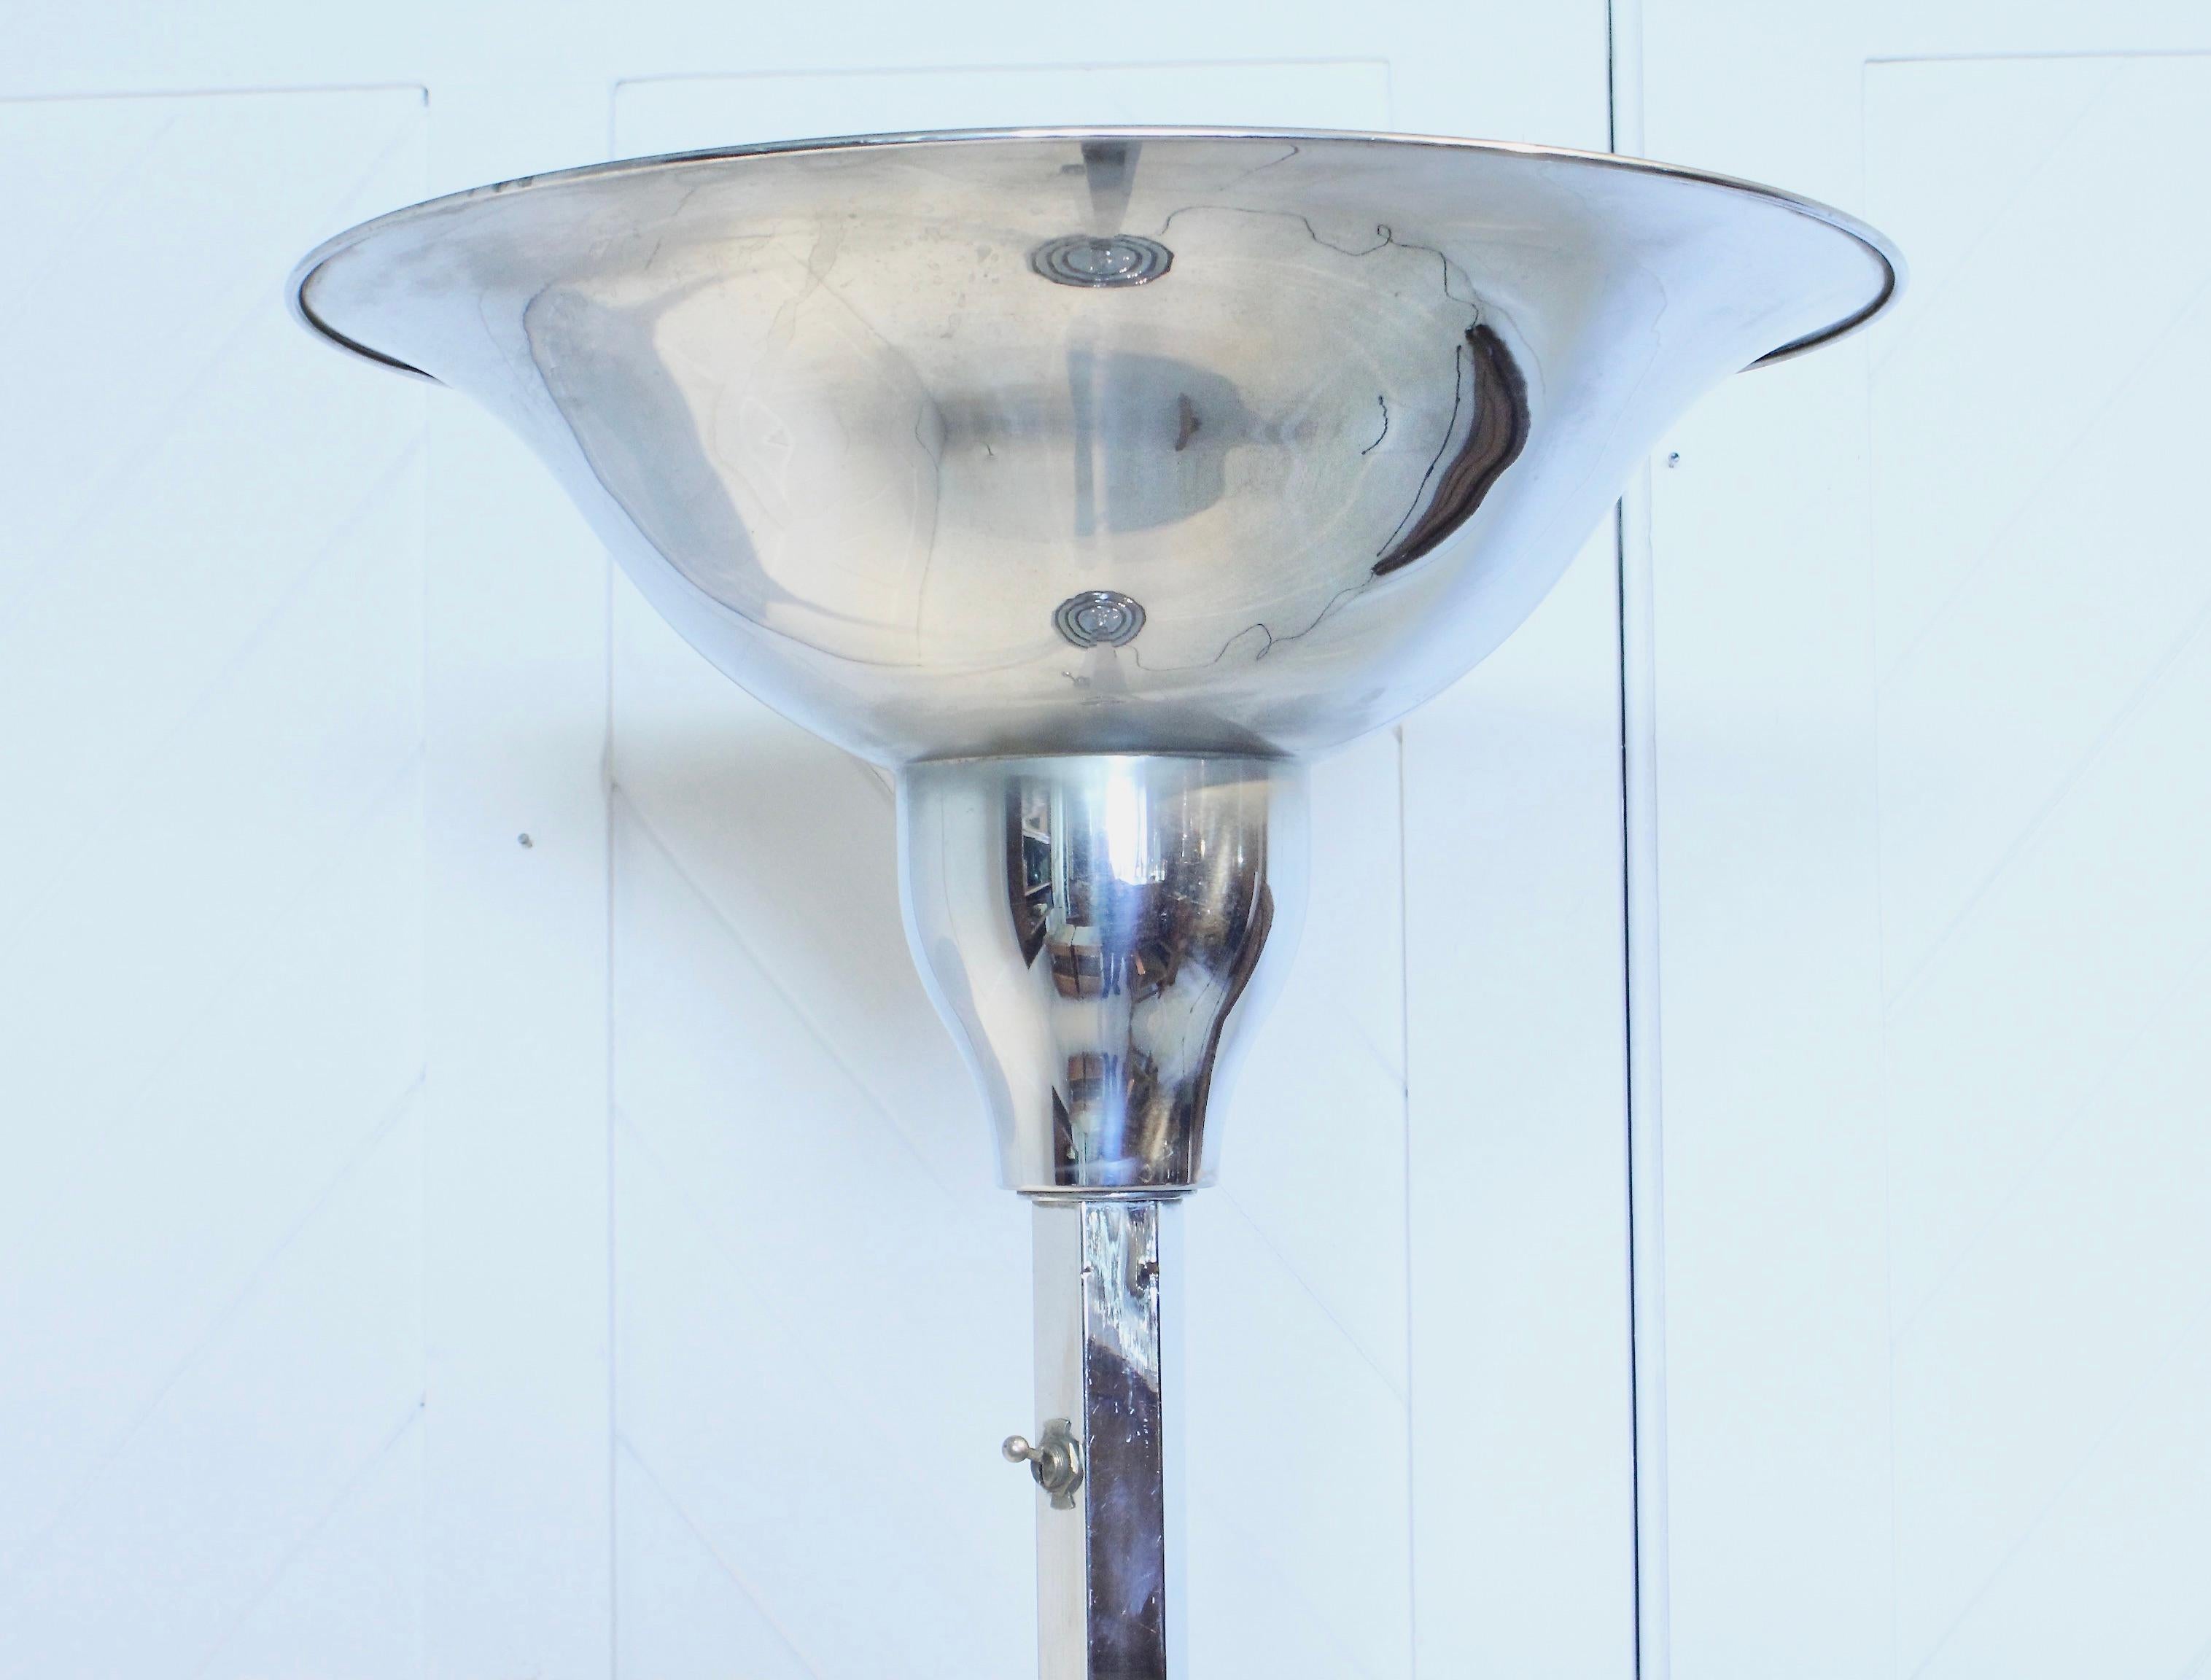 A fabulous original Art Deco chrome standard lamp
The base is in chrome with black stepped detailing
The chrome uplighter has a holophane internal glass shade
Circa 1930.